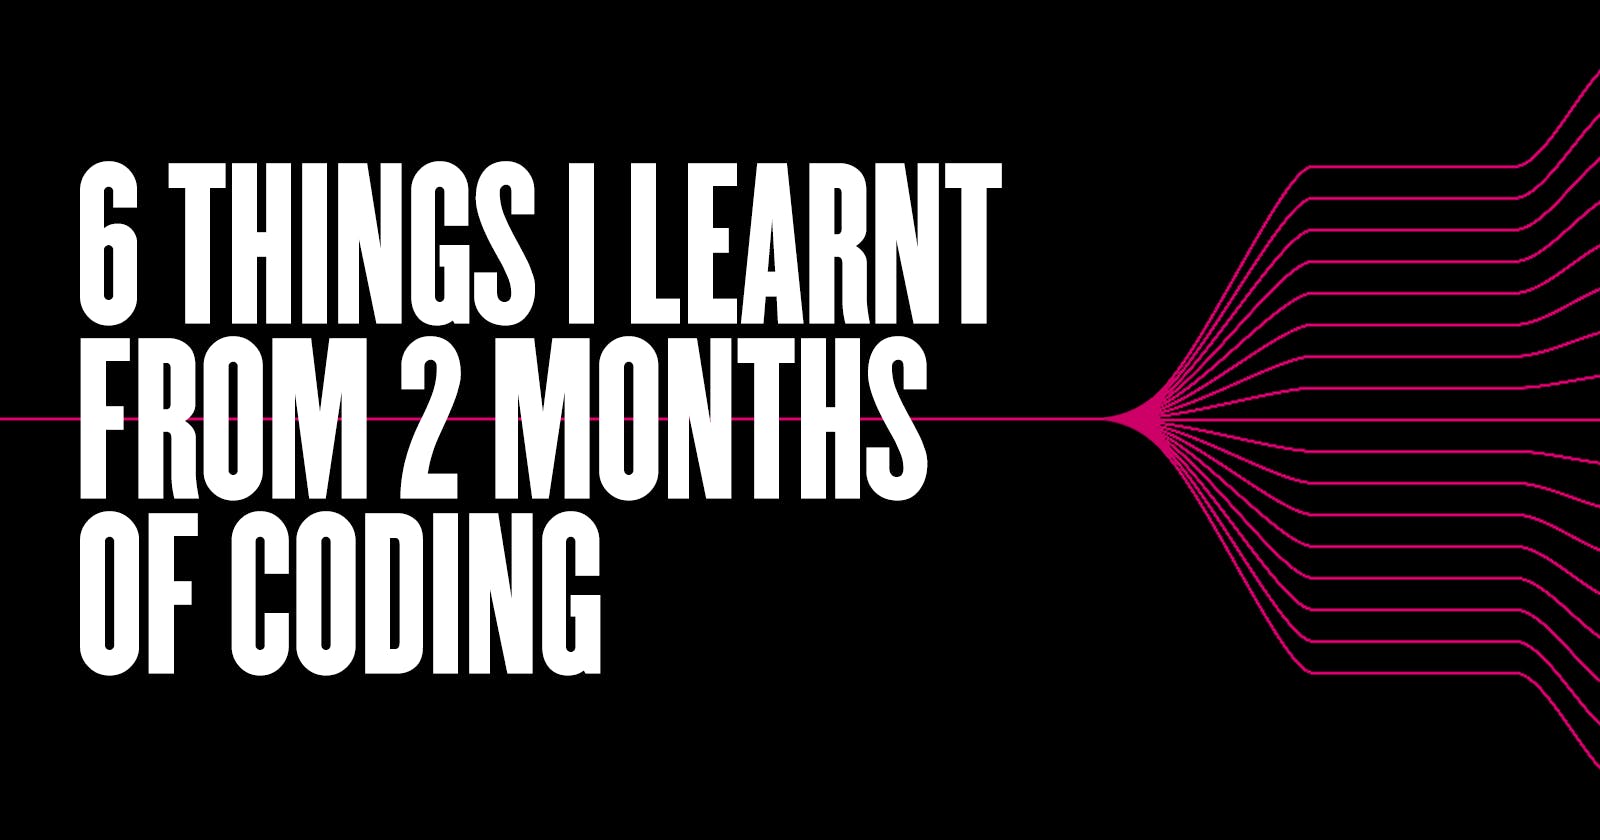 🧠 6 Things I Learnt from 2 Months of Coding